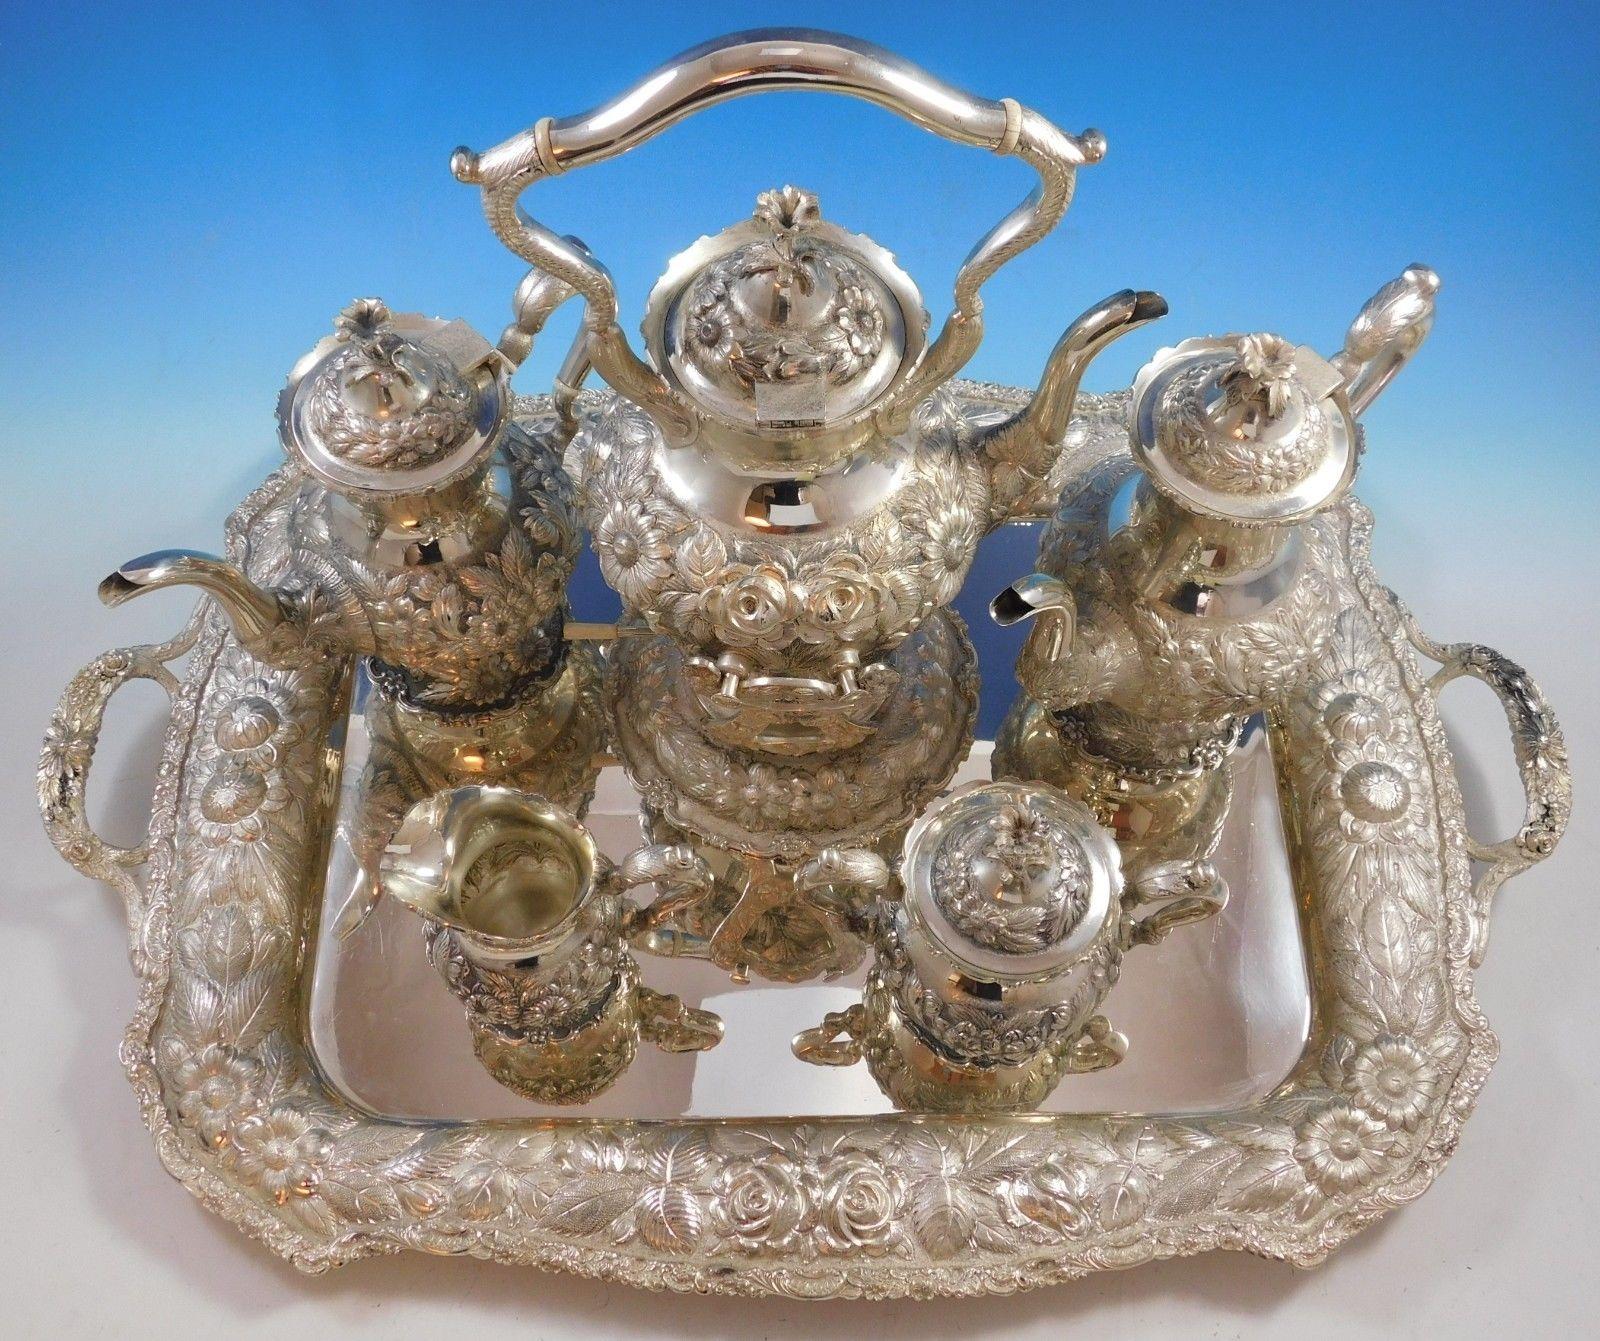 Rose by Stieff

Incredible rose by Stieff repoussed sterling silver five-piece tea set with sterling silver tray. This set features a 3-D flower finial and fine hand chased design. Stieff made many different rose tea sets, this is the largest that